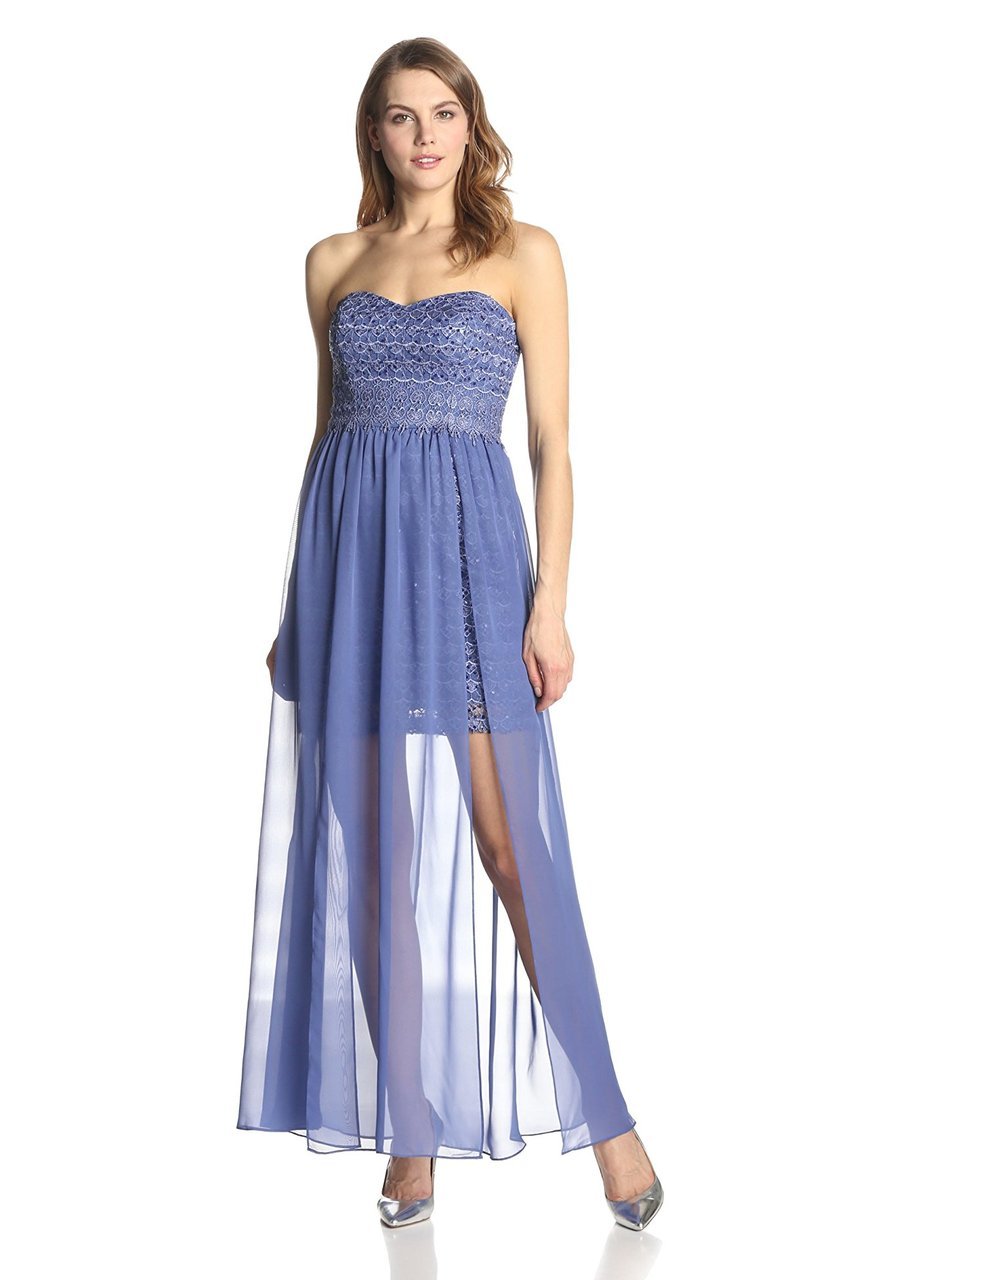 Adrianna Papell - Strapless Lace Dress 231M48940 in Blue